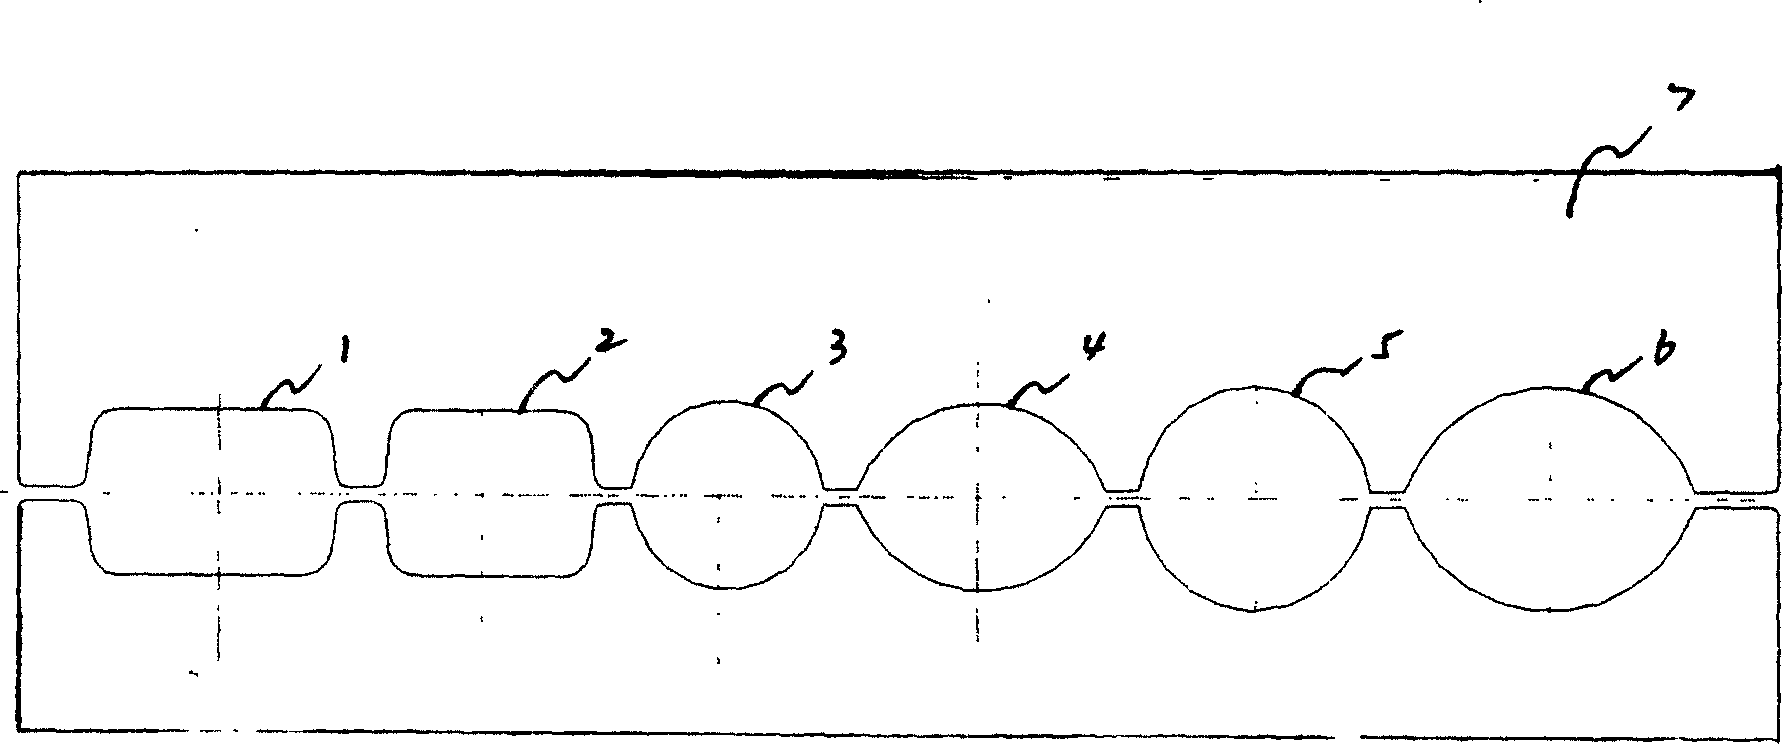 Method for rolling large circular steel by primary rolling mill